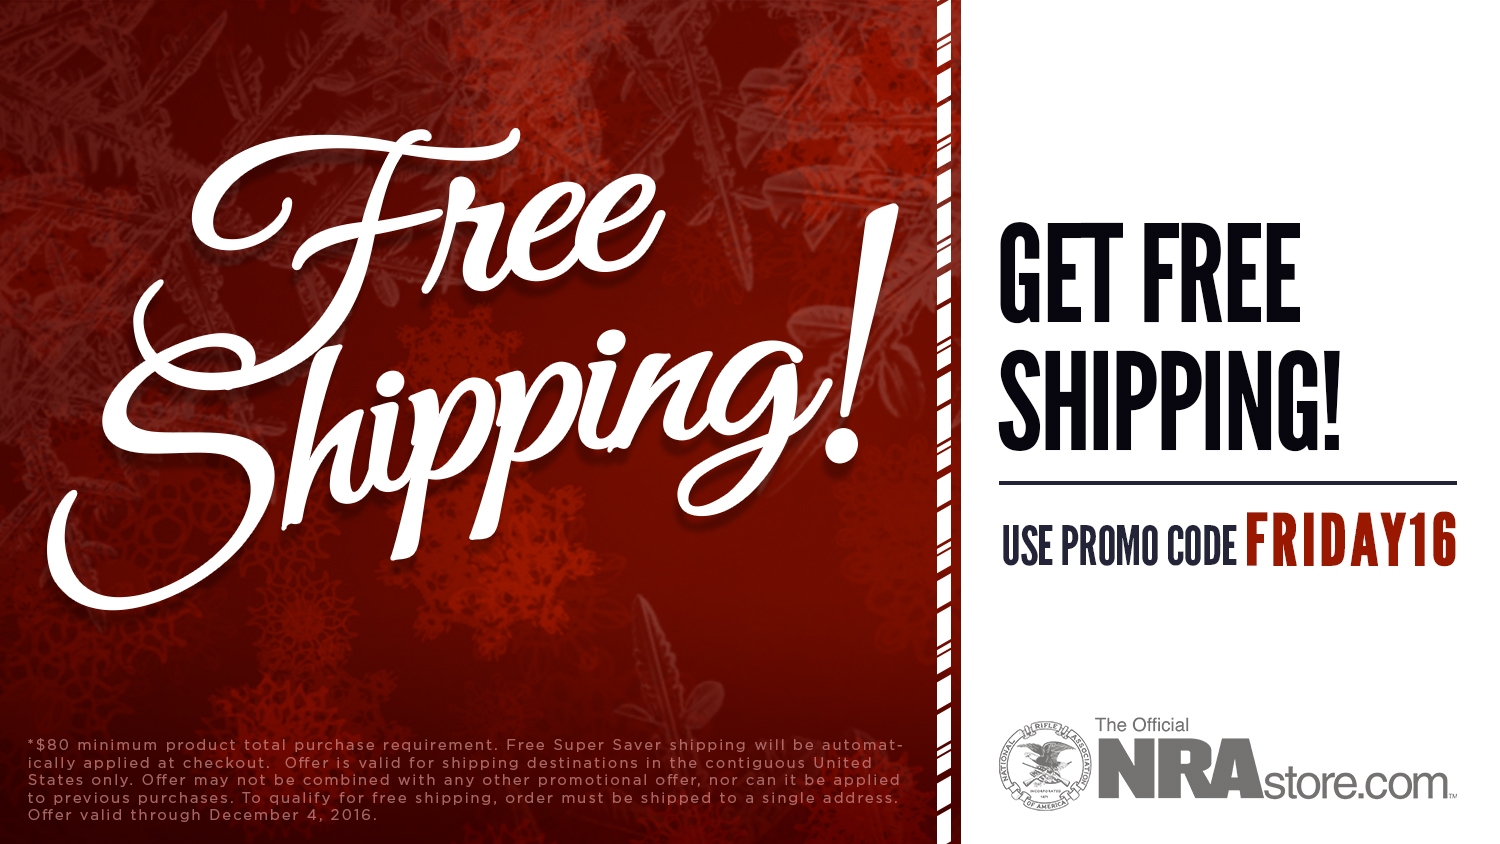 Get Free Shipping from the NRAstore this Black Friday!